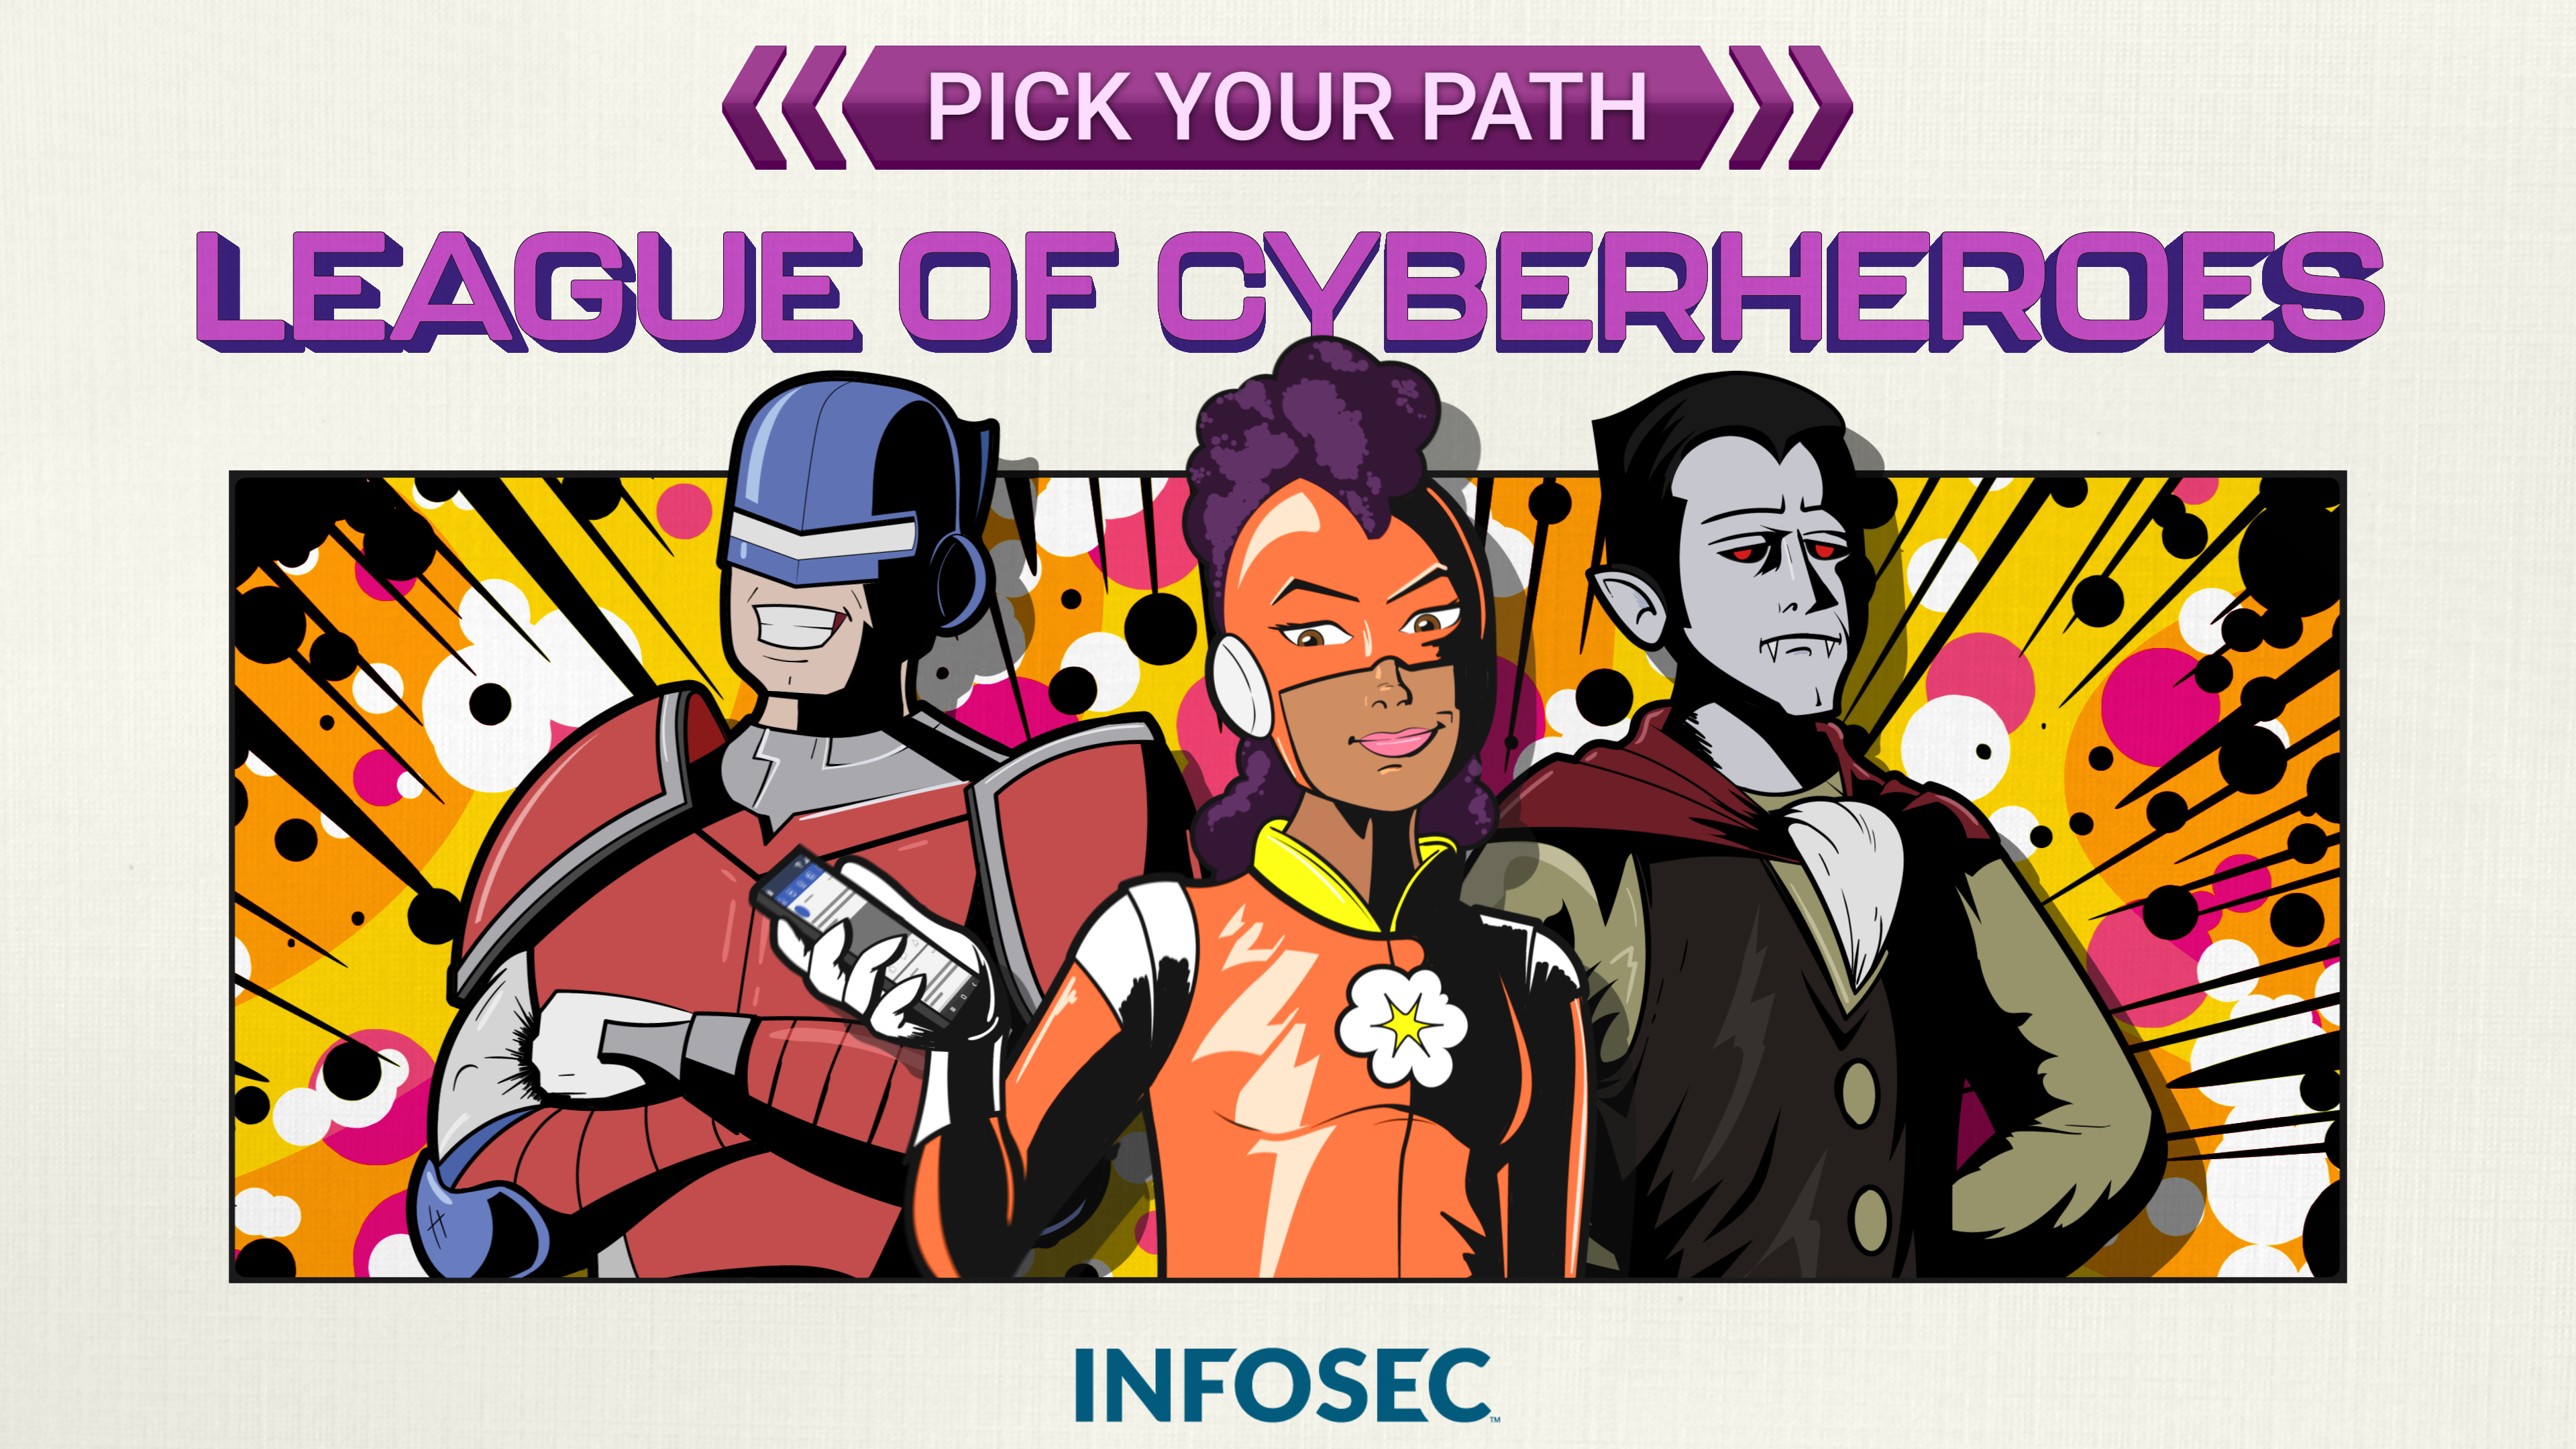 Pick Your Path: League of Cyberheroes